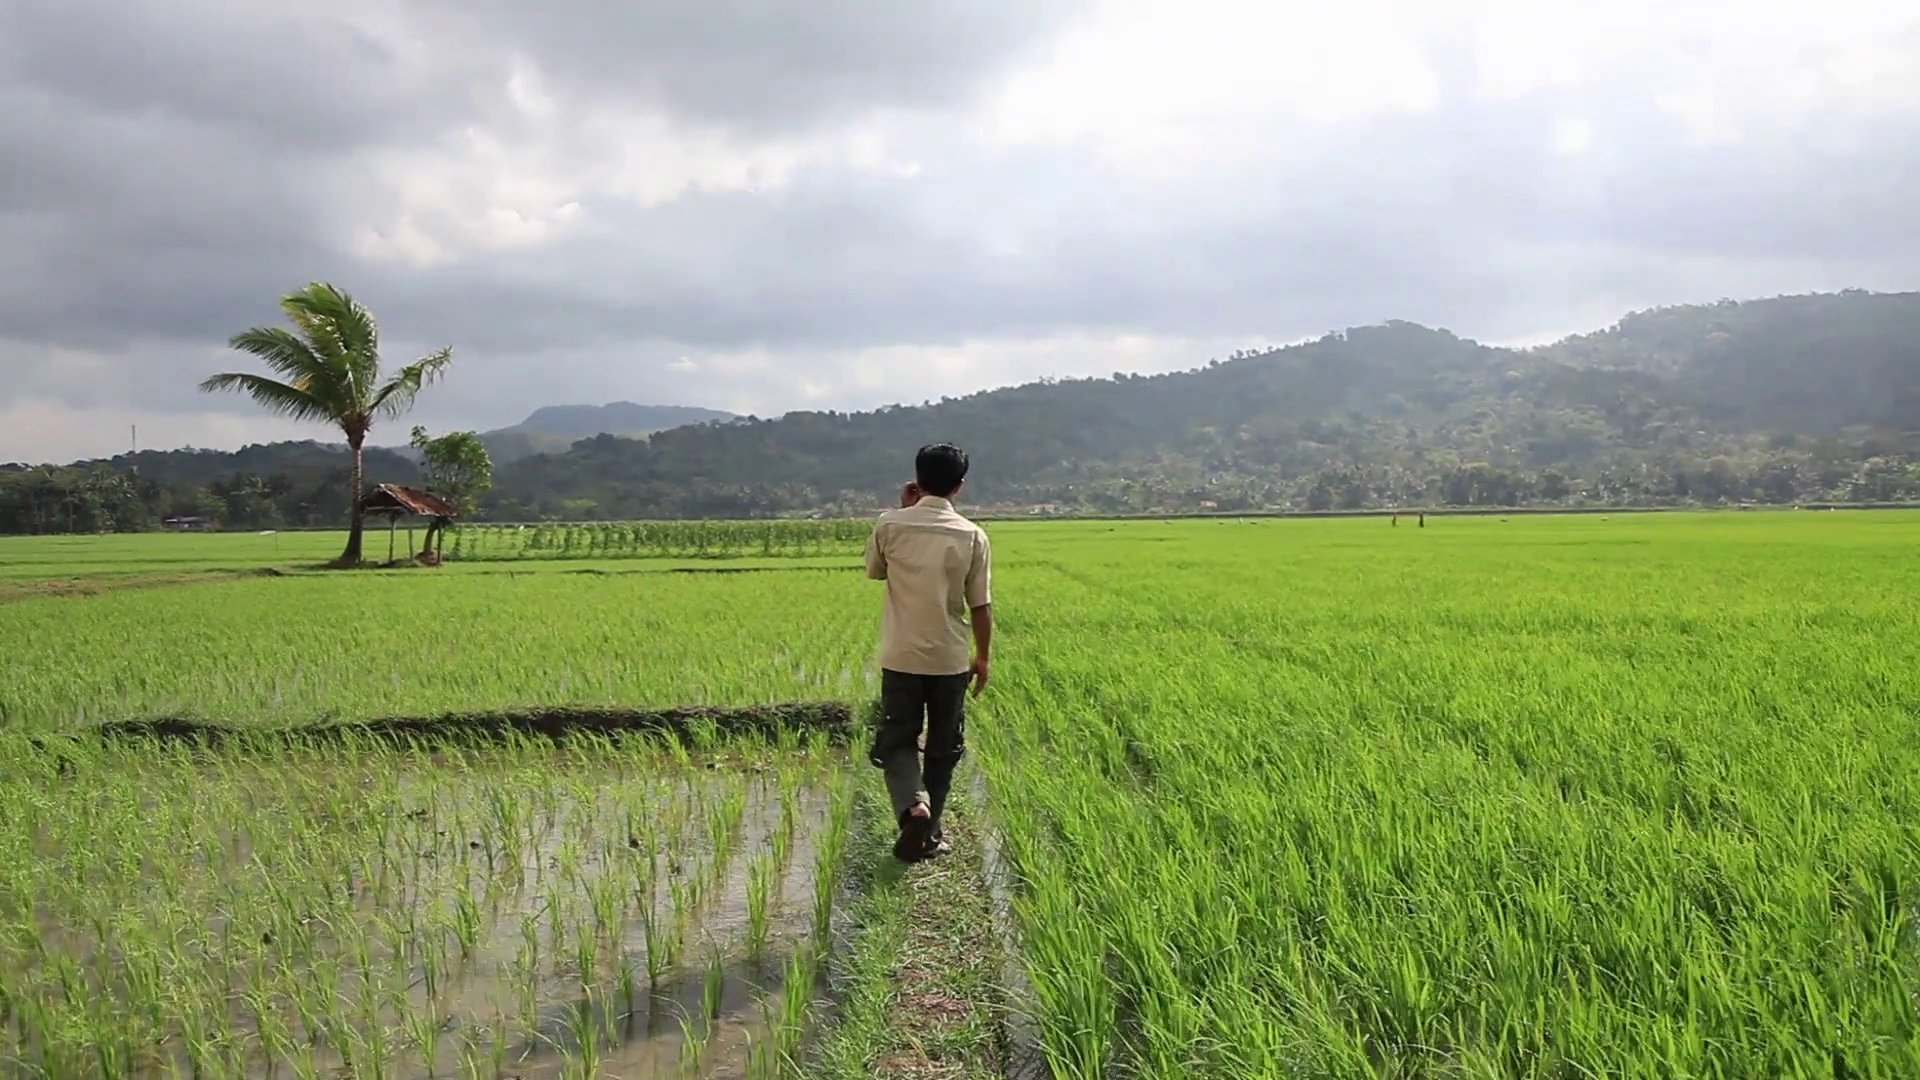 Man Walking Surrounded By Paddy Field Stock Video Footage - VideoBlocks